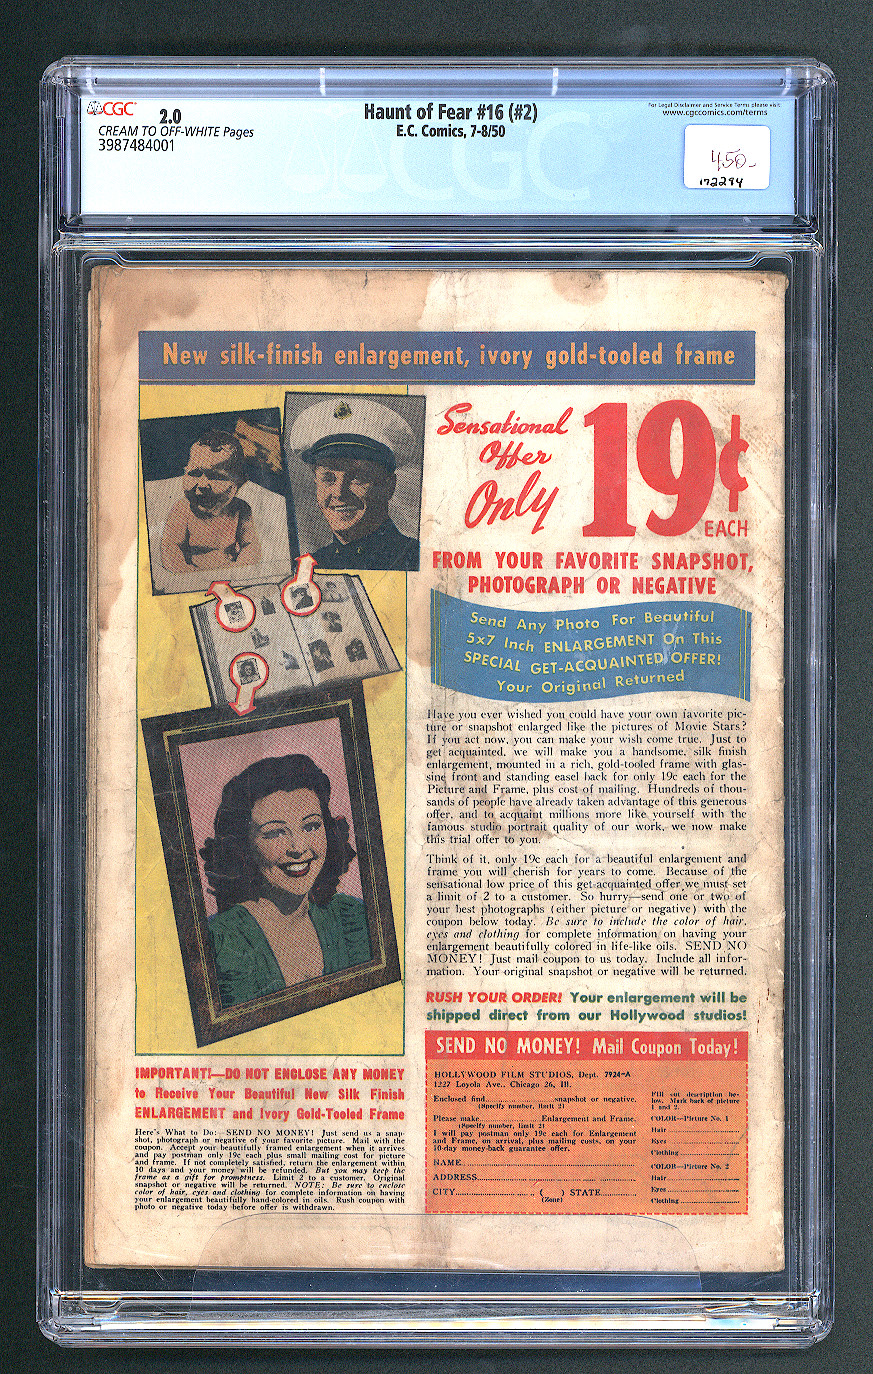 Haunt of Fear #16 #2 (1950) CGC 2.0 Back Cover